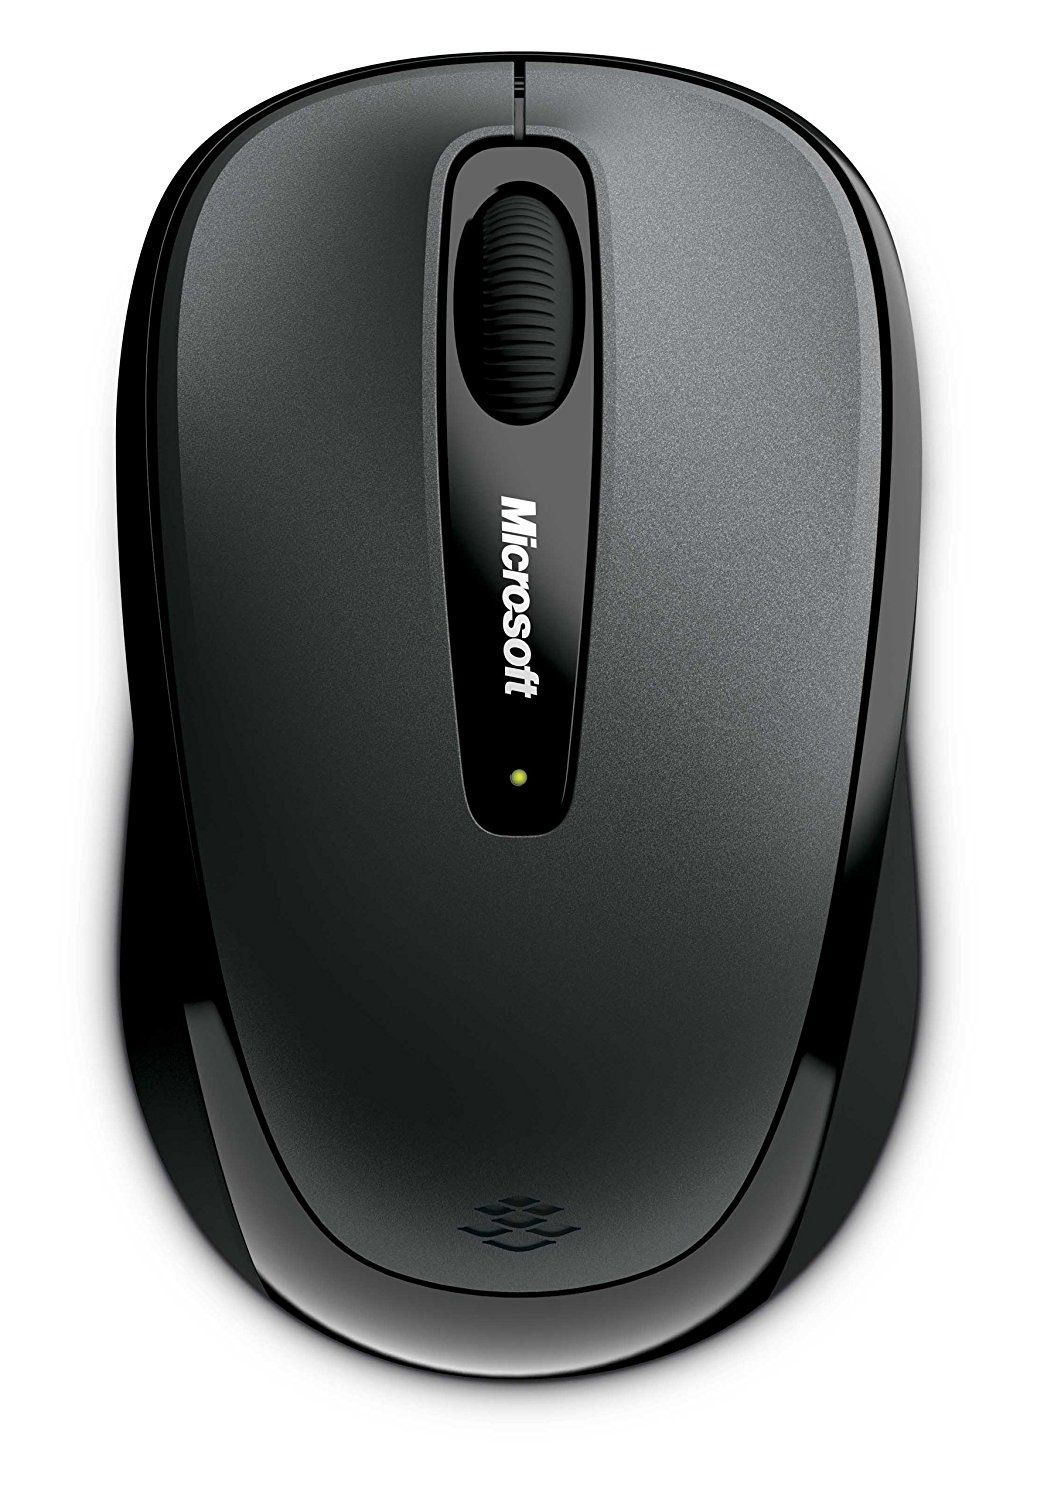 microsoft wireless mouse 3500 not working